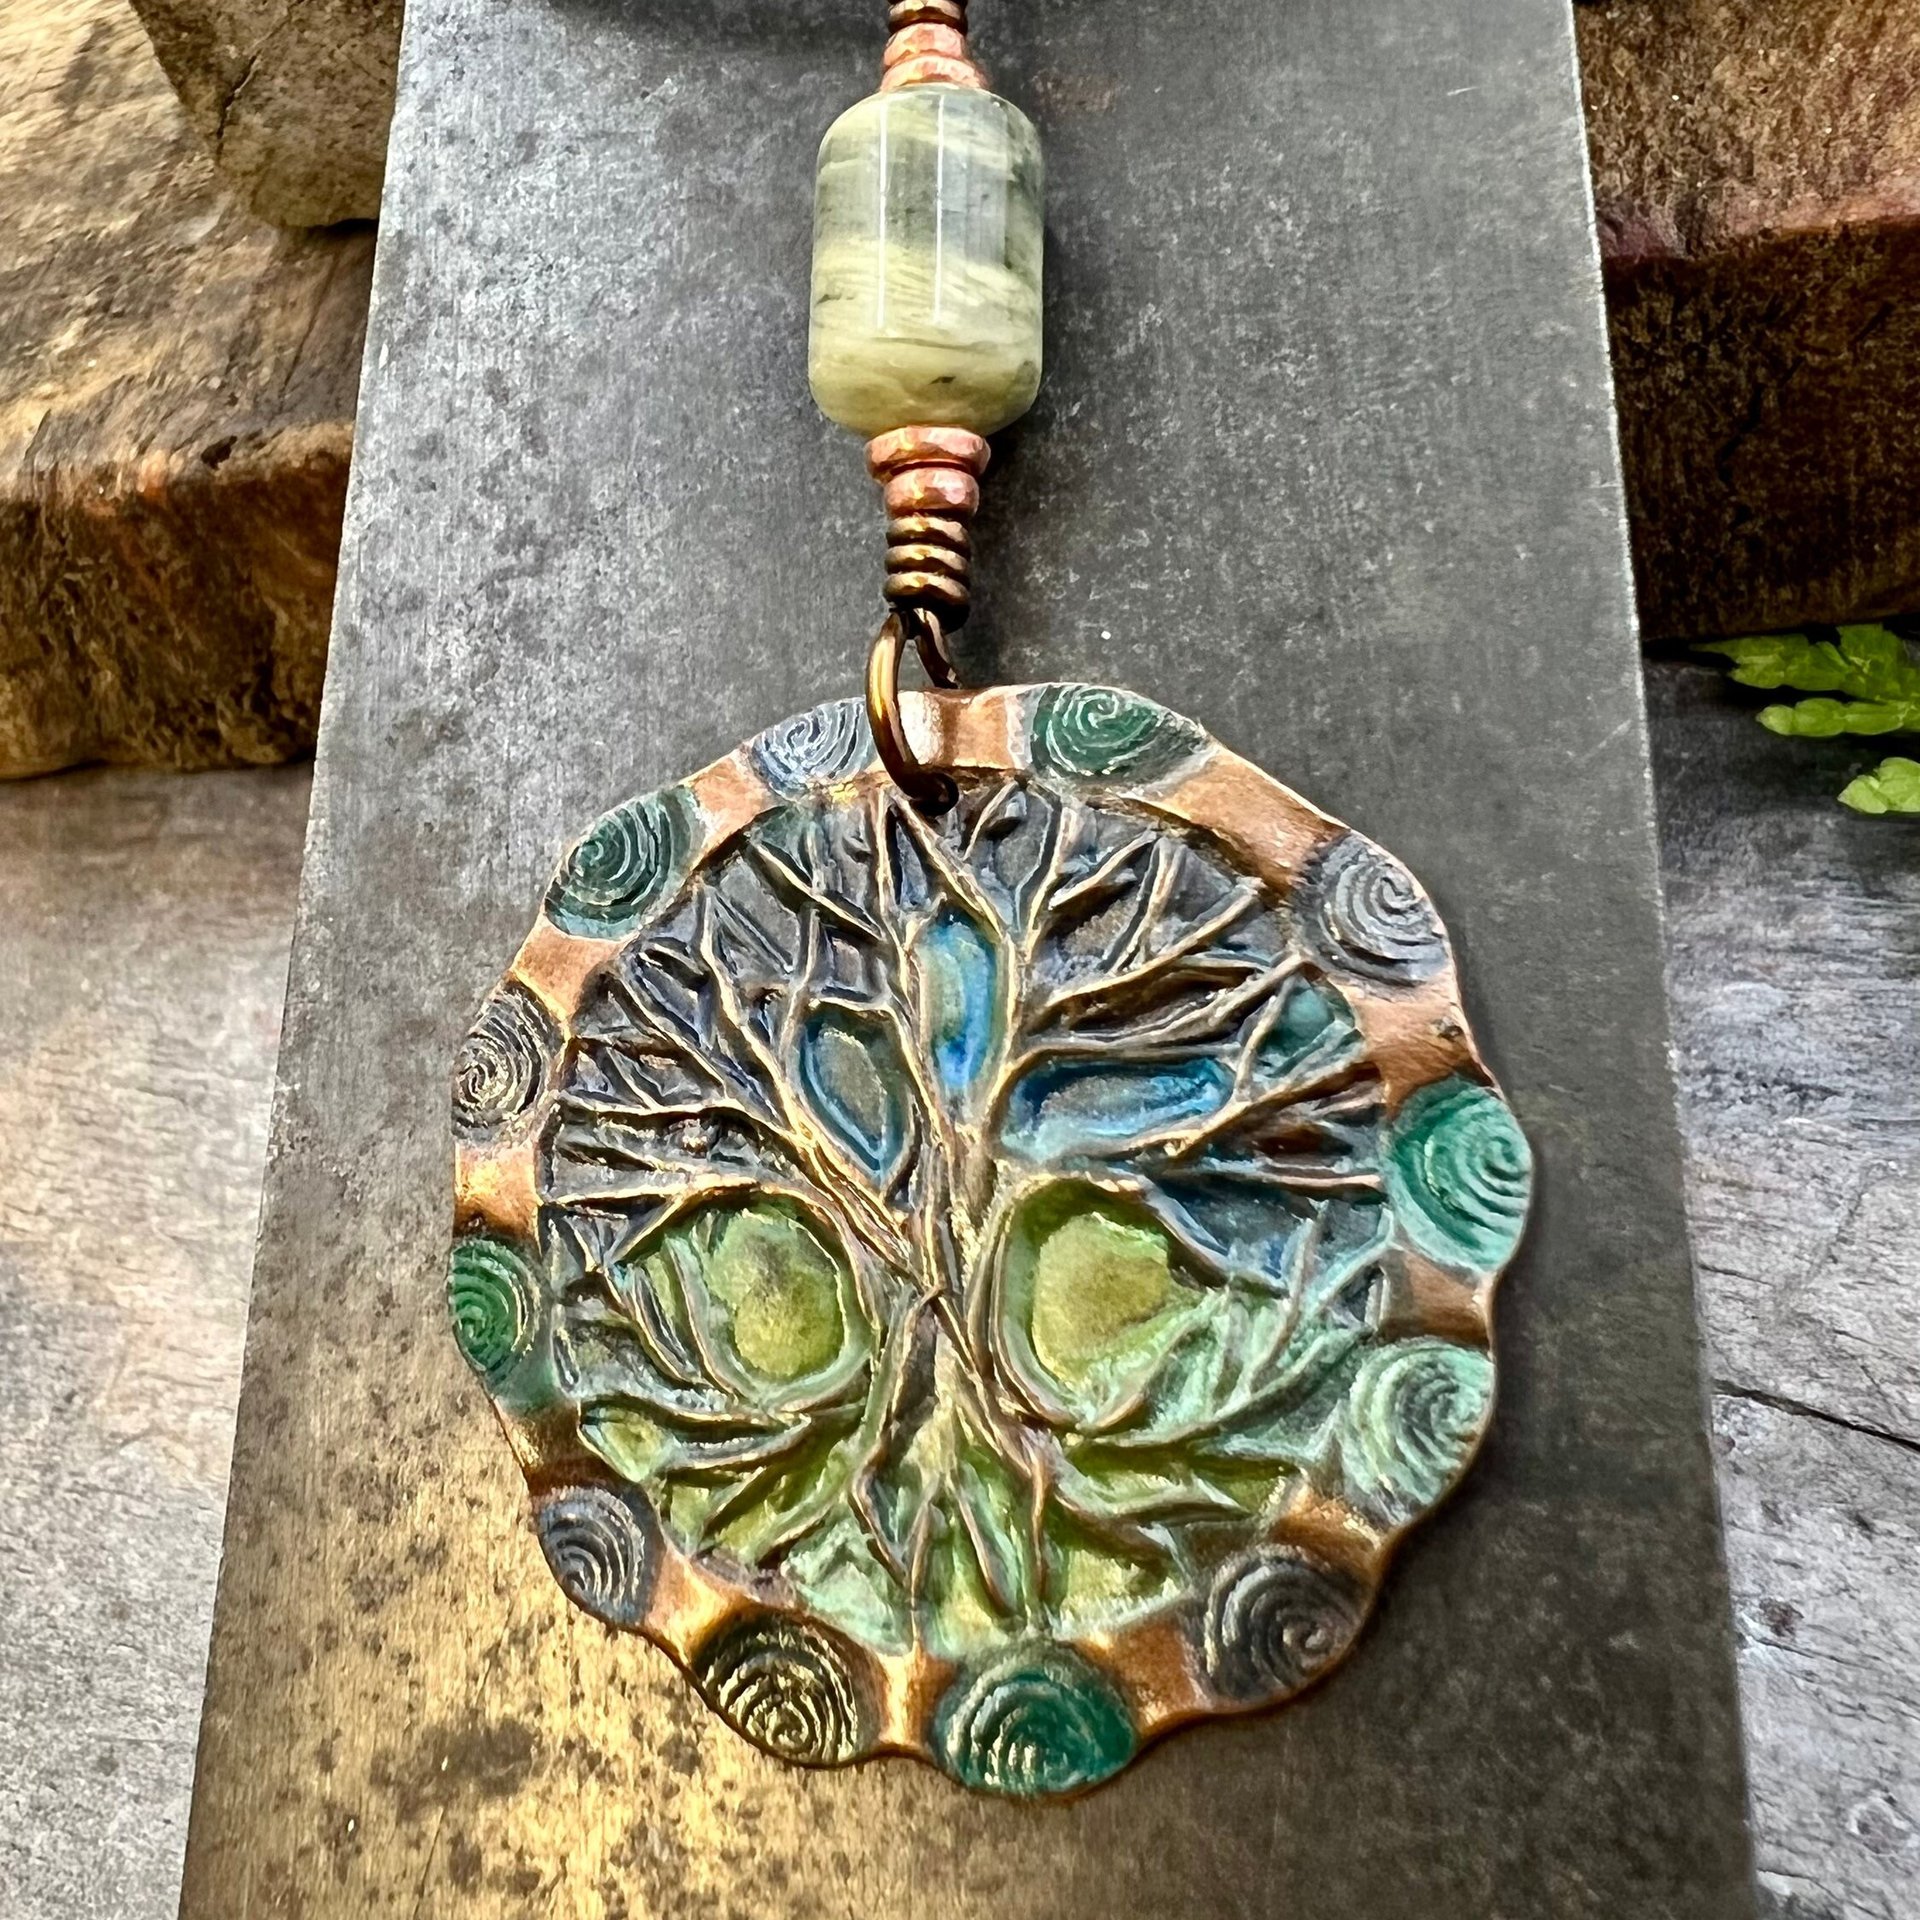 Tree of Life Pendant, Copper Colorful Patina, Connemara Marble, Hand Carved, Irish Celtic Spirals, Celtic Witch Goddess, Ancient Earthy Art